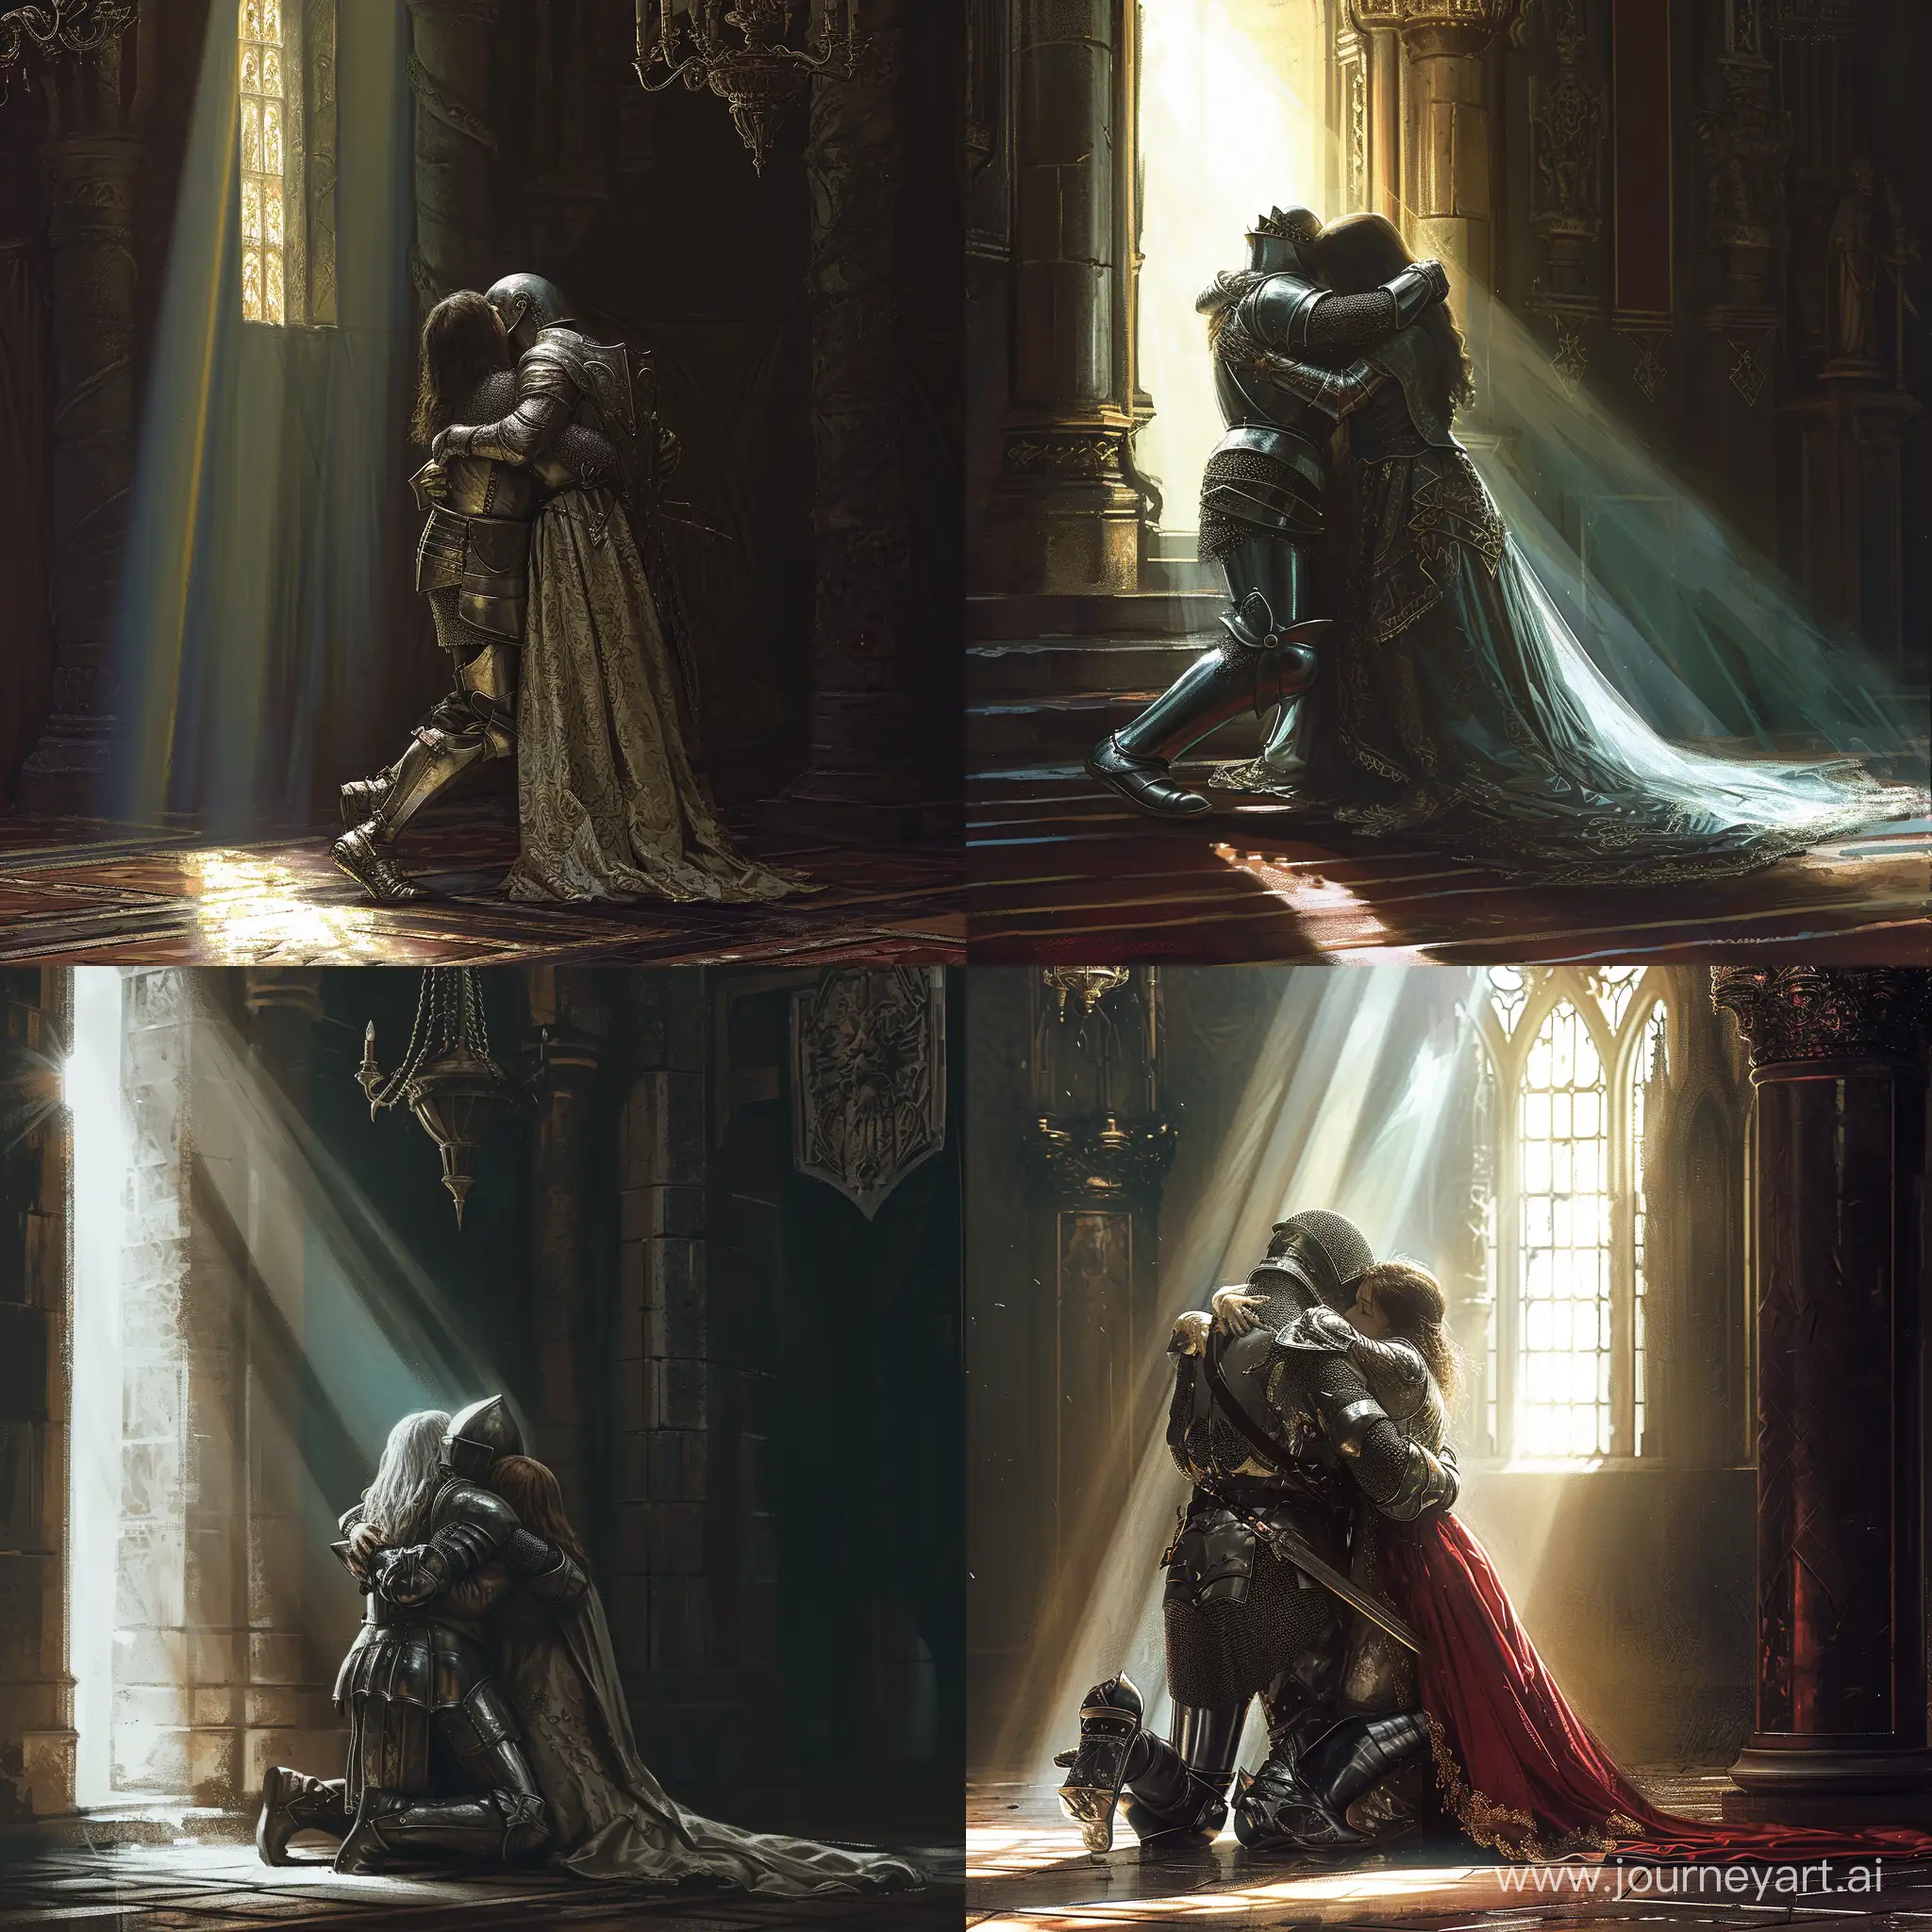 Knight-Embracing-Royal-Queen-in-Dark-Fantasy-Palace